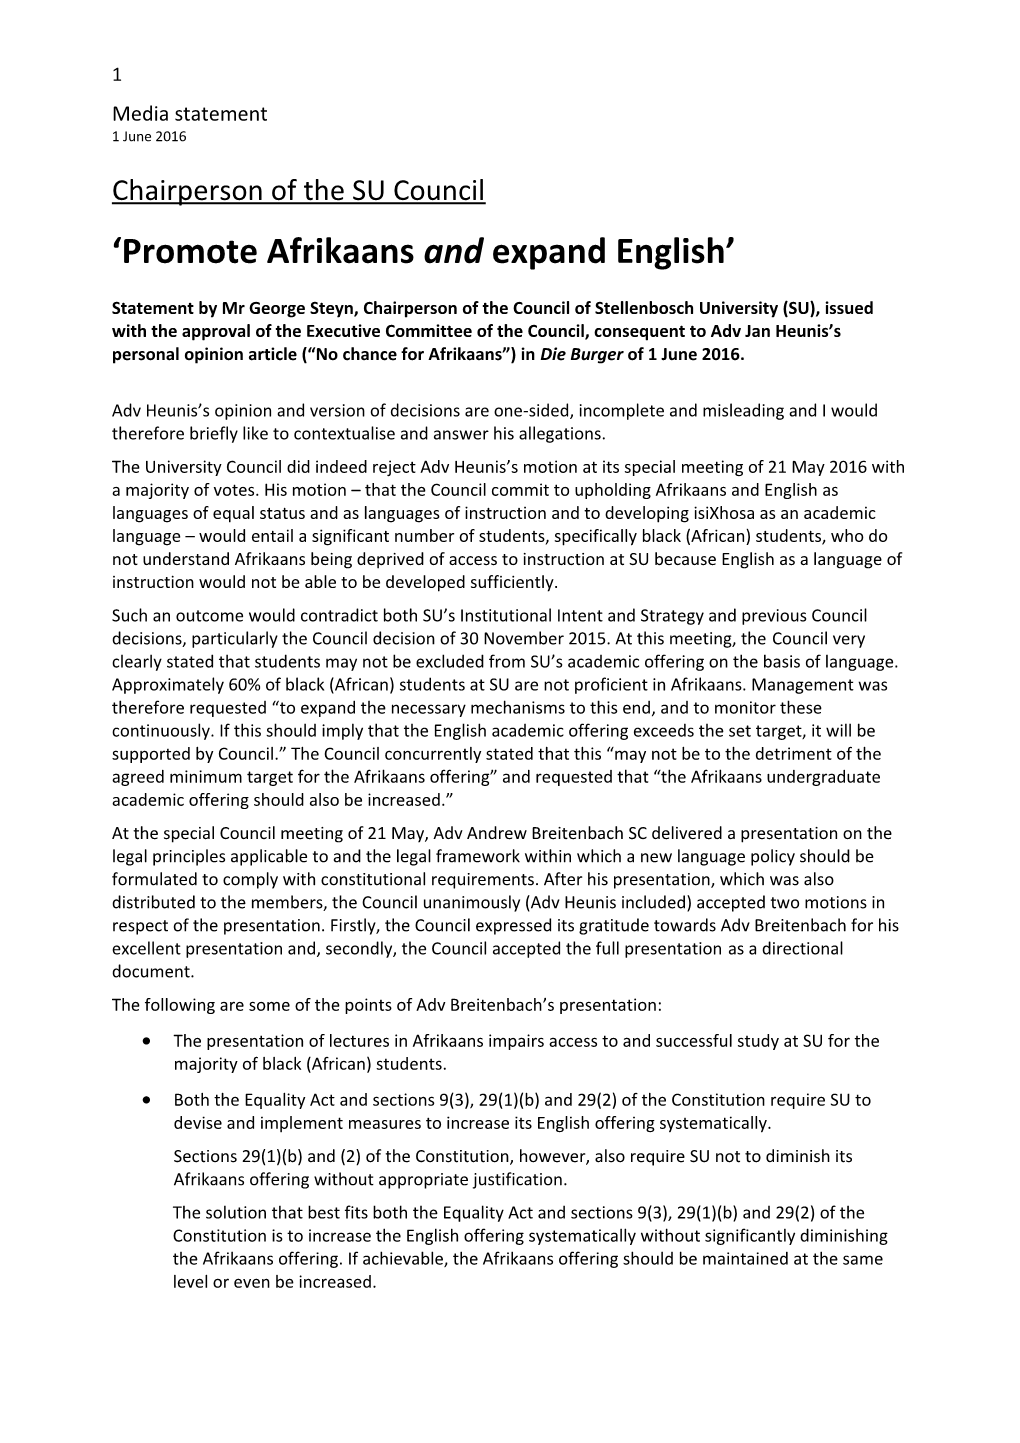 Promote Afrikaans and Expand English